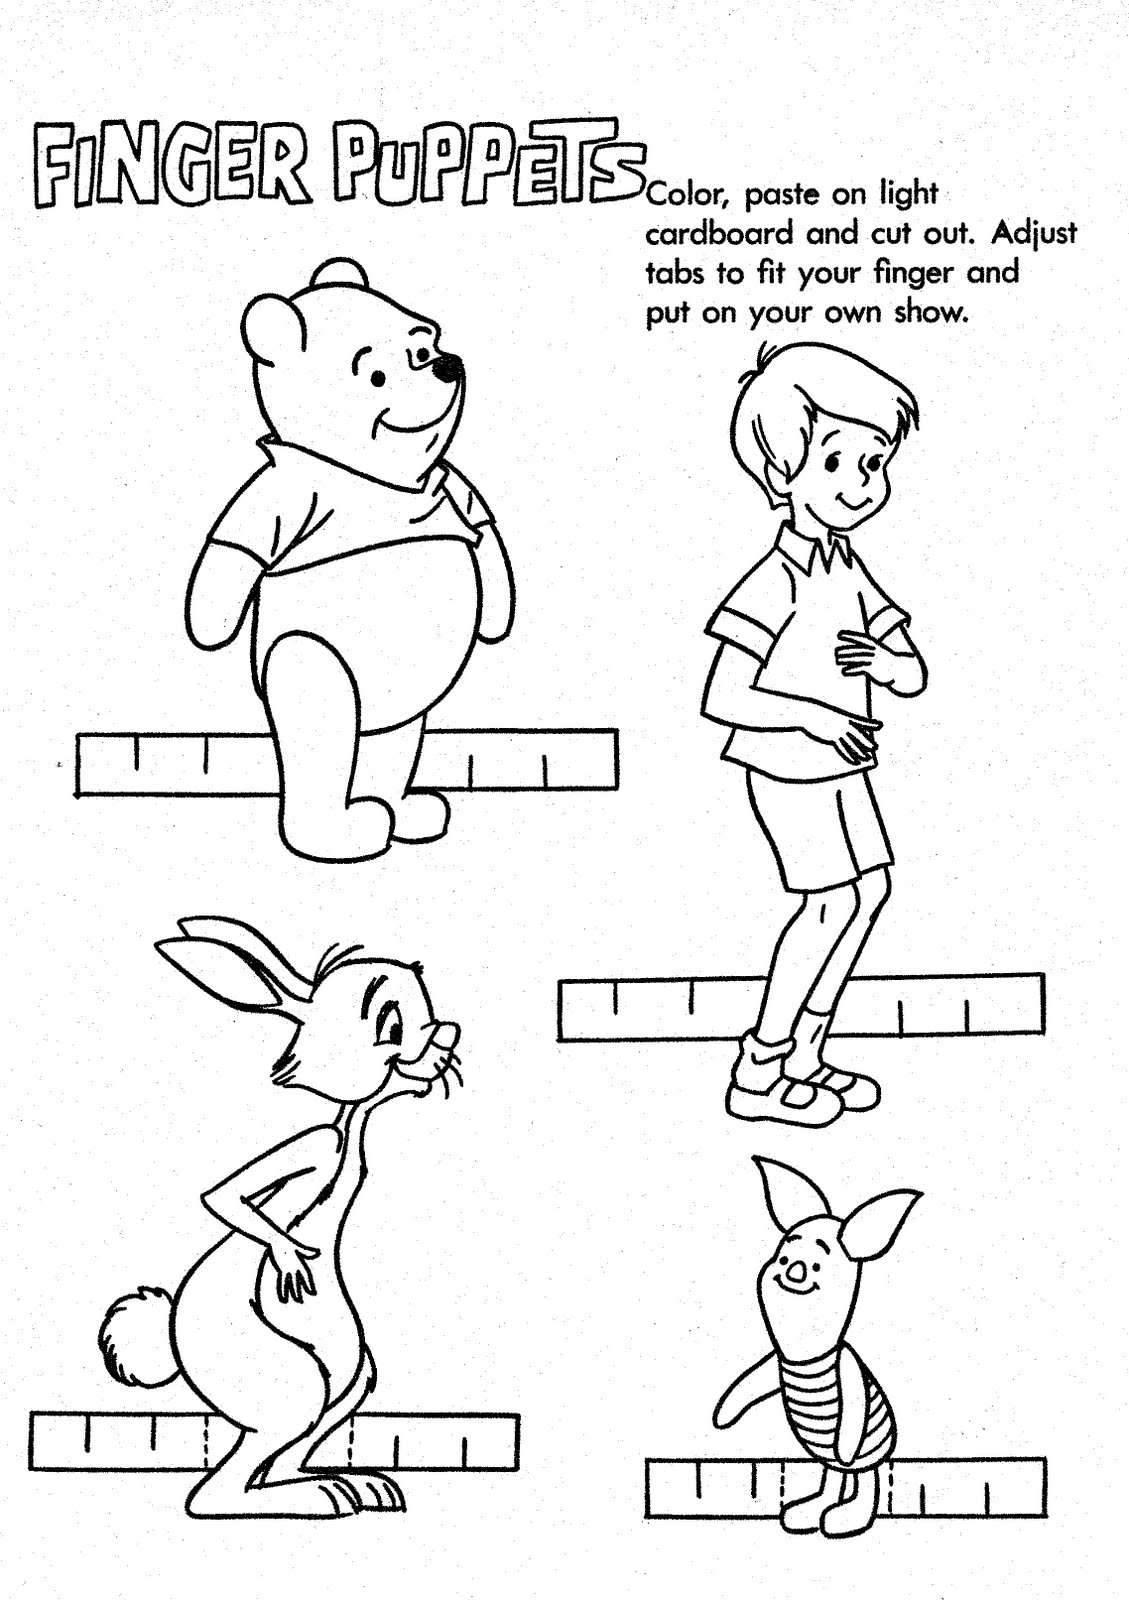 mostly-paper-dolls-winnie-the-pooh-finger-puppets